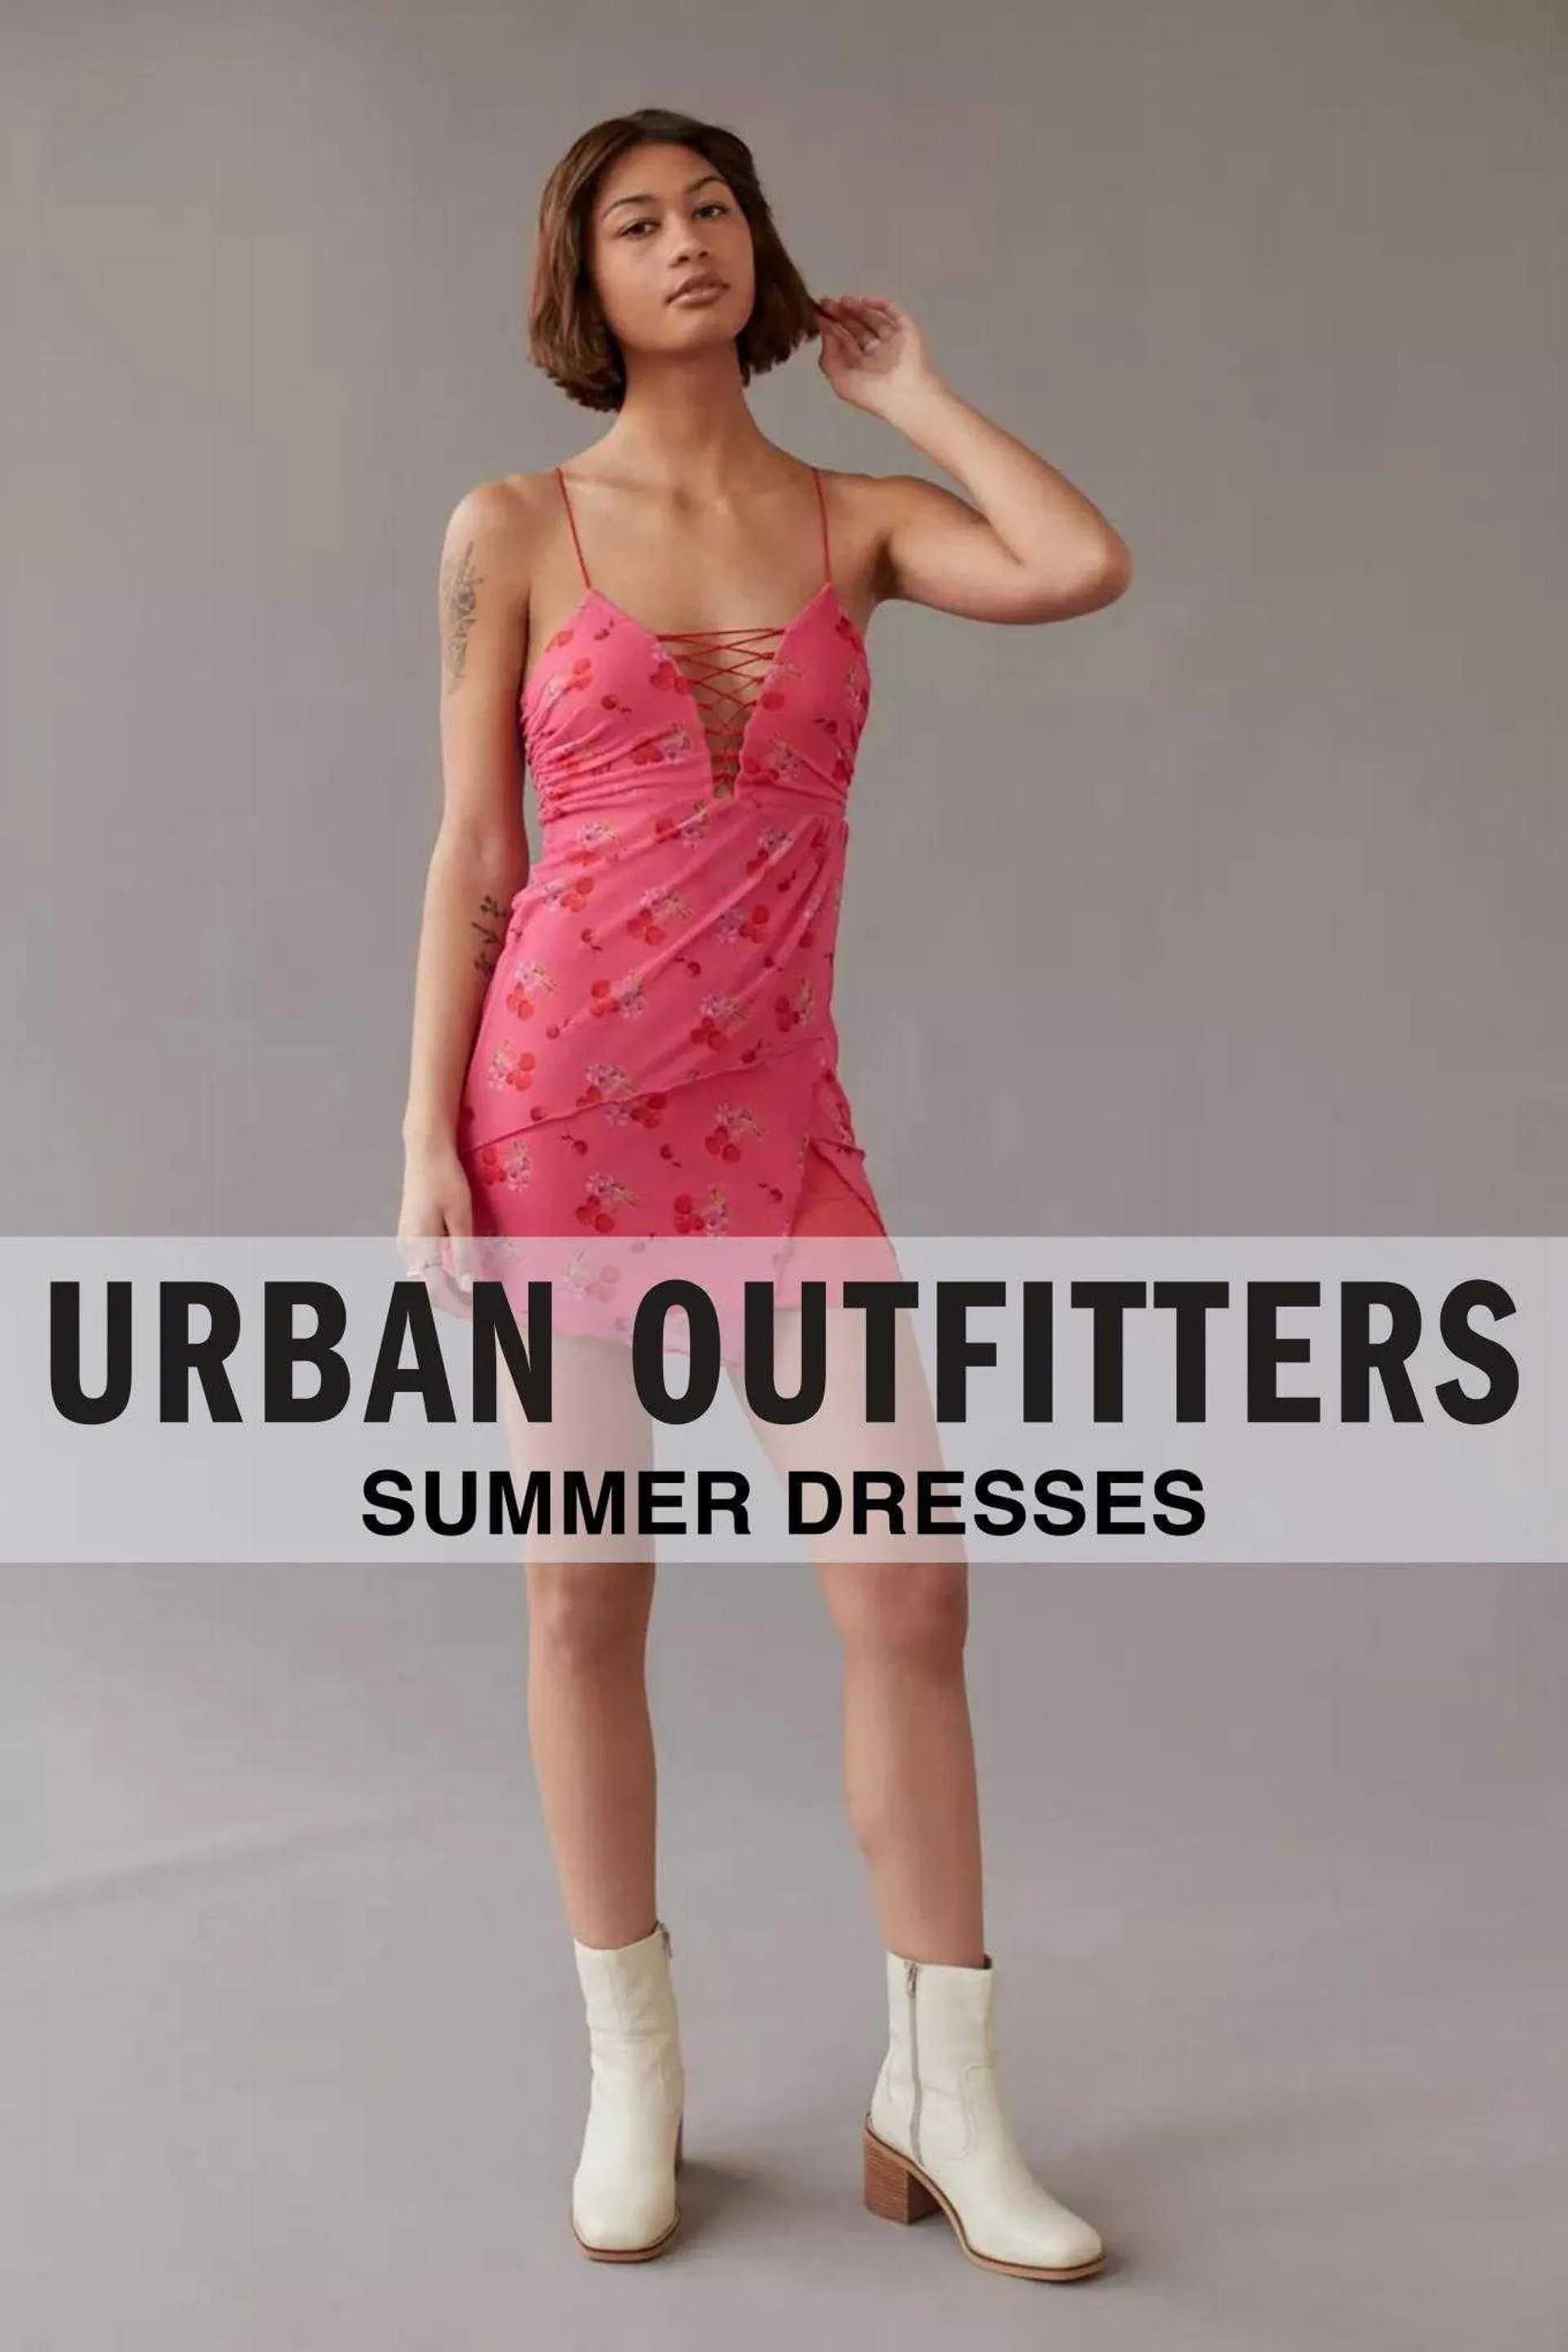 Urban Outfitters Catalog - 1